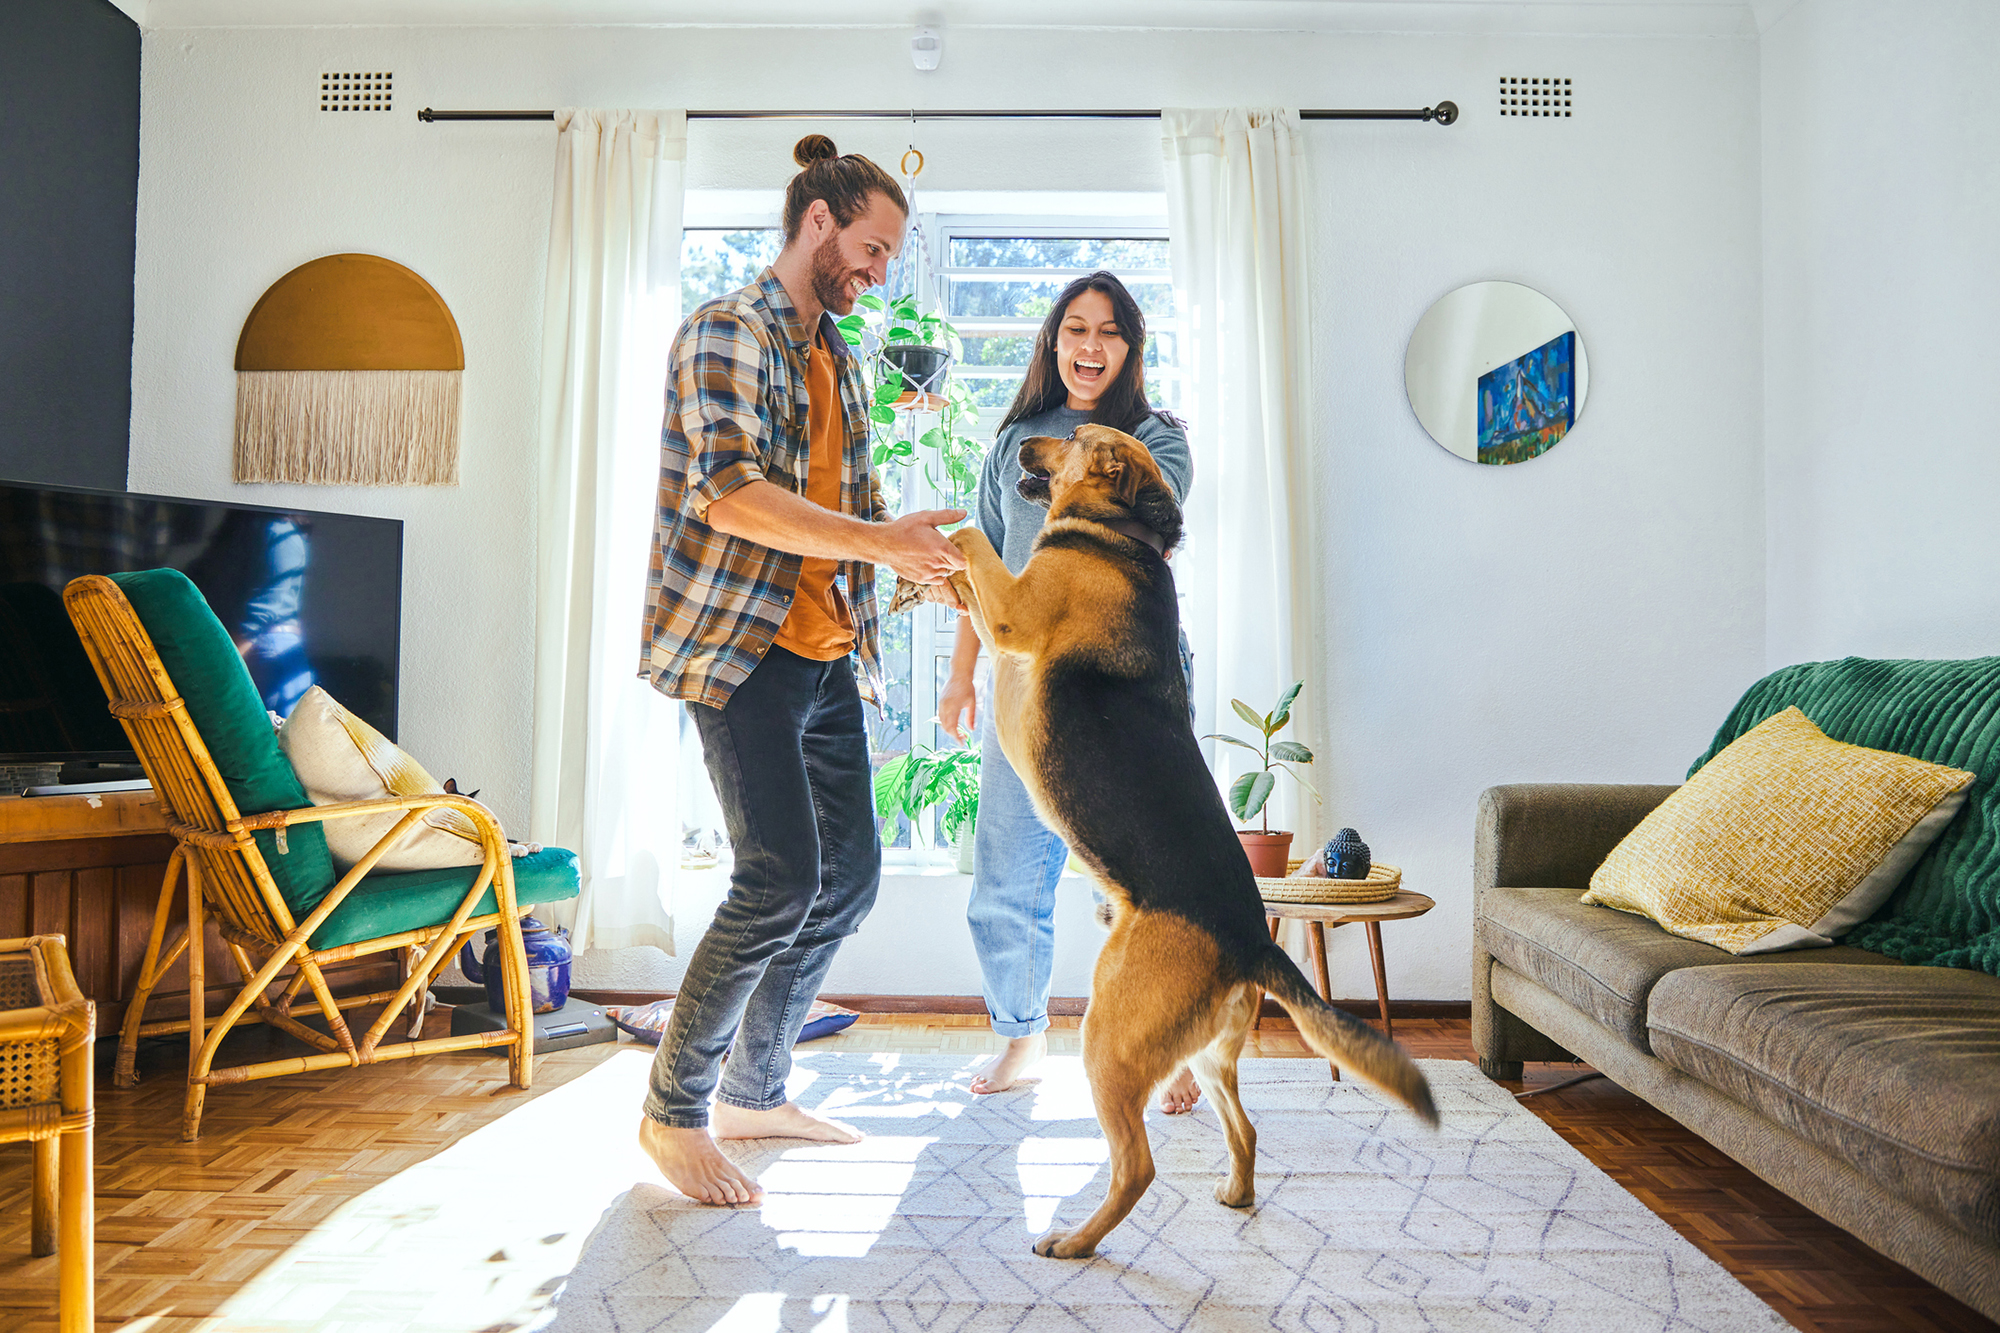 A young couple playing with their dog in the house.